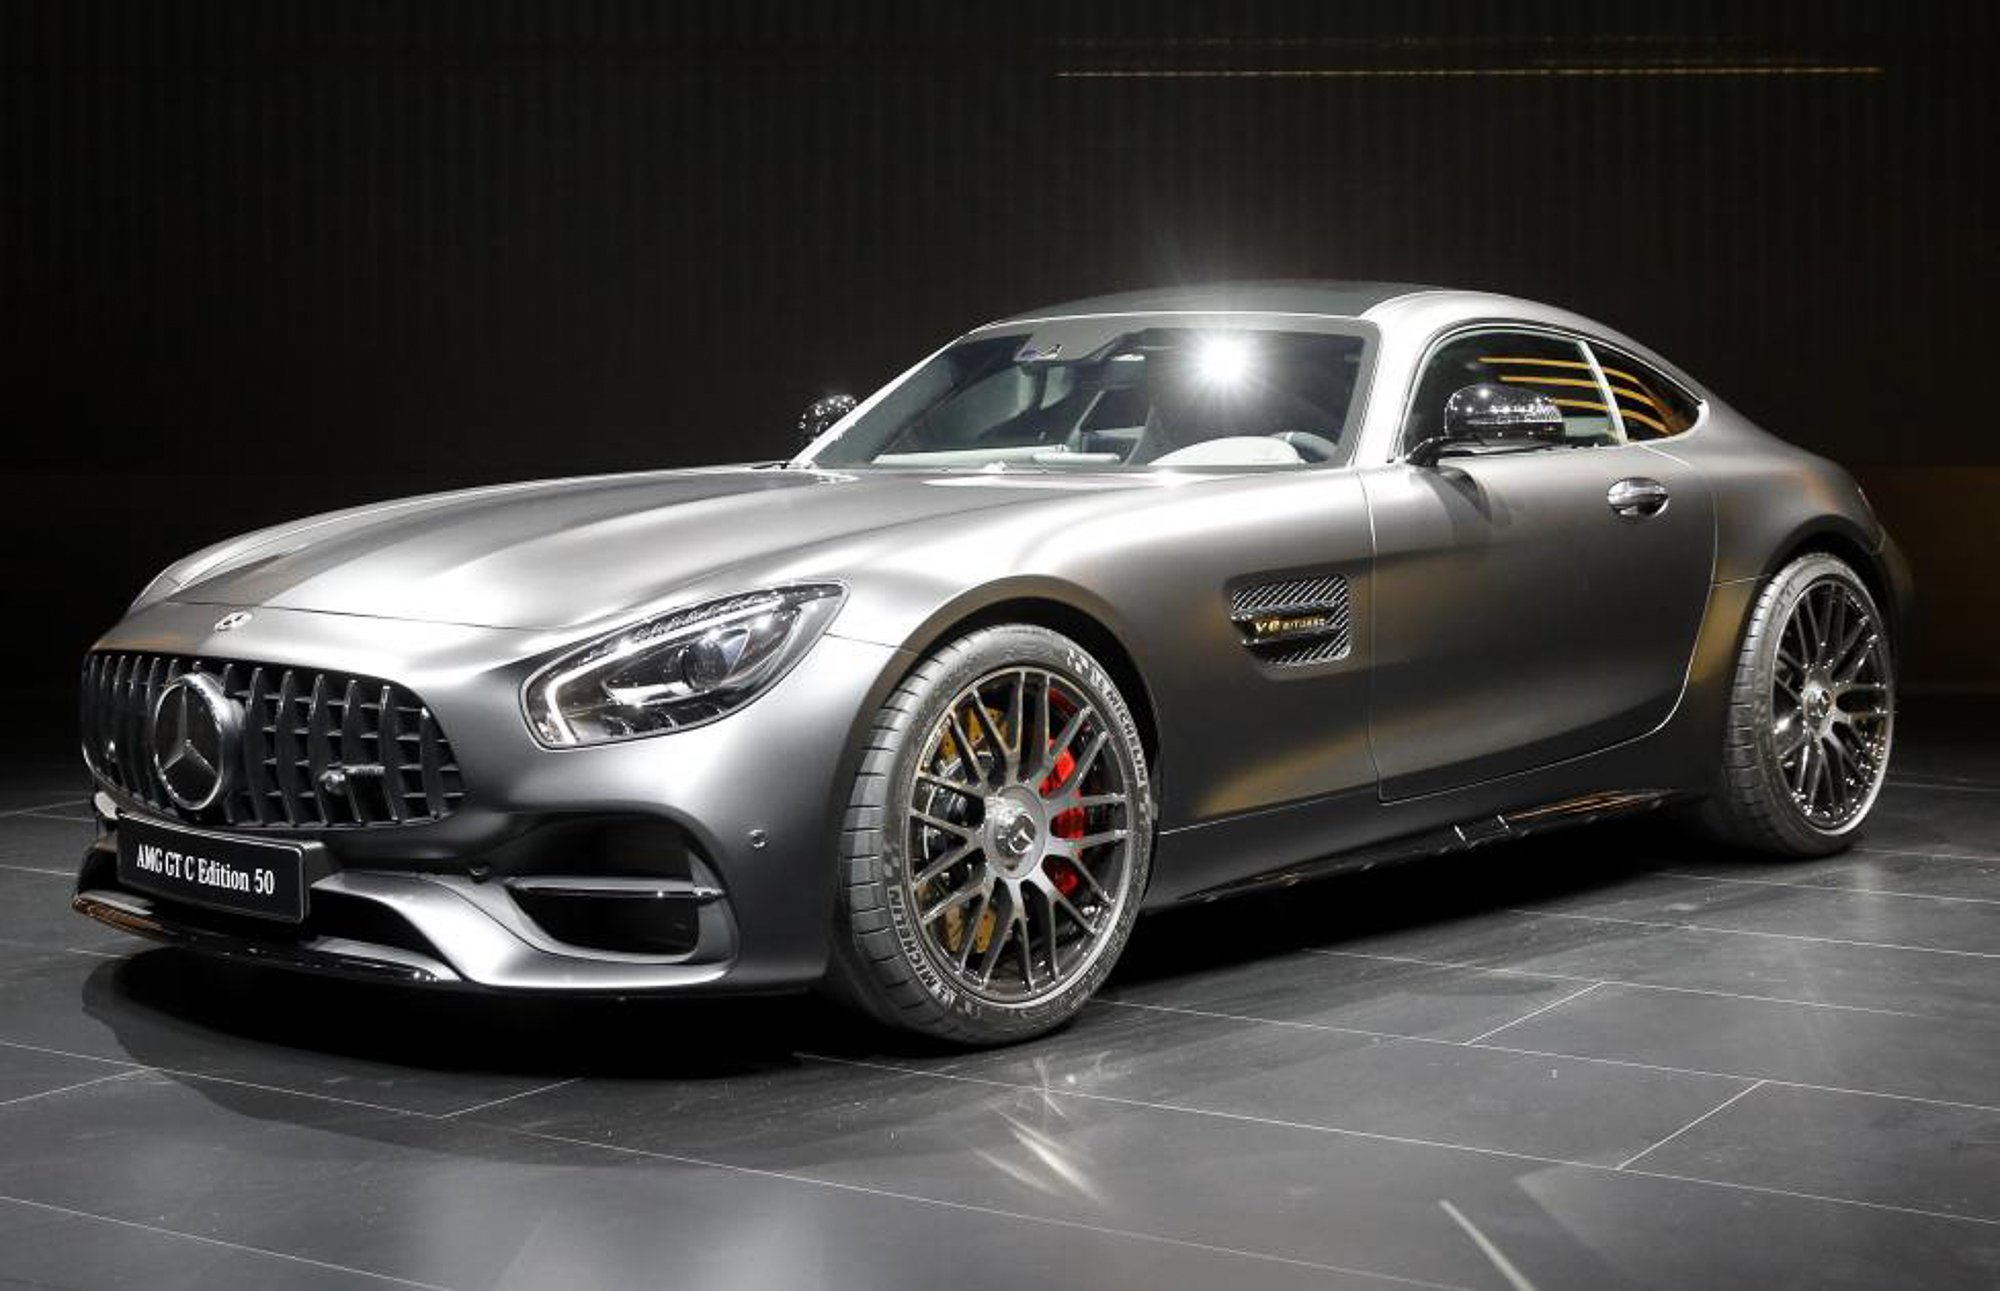 the 2018 mercedes amg gt c edition 50 photo reuters